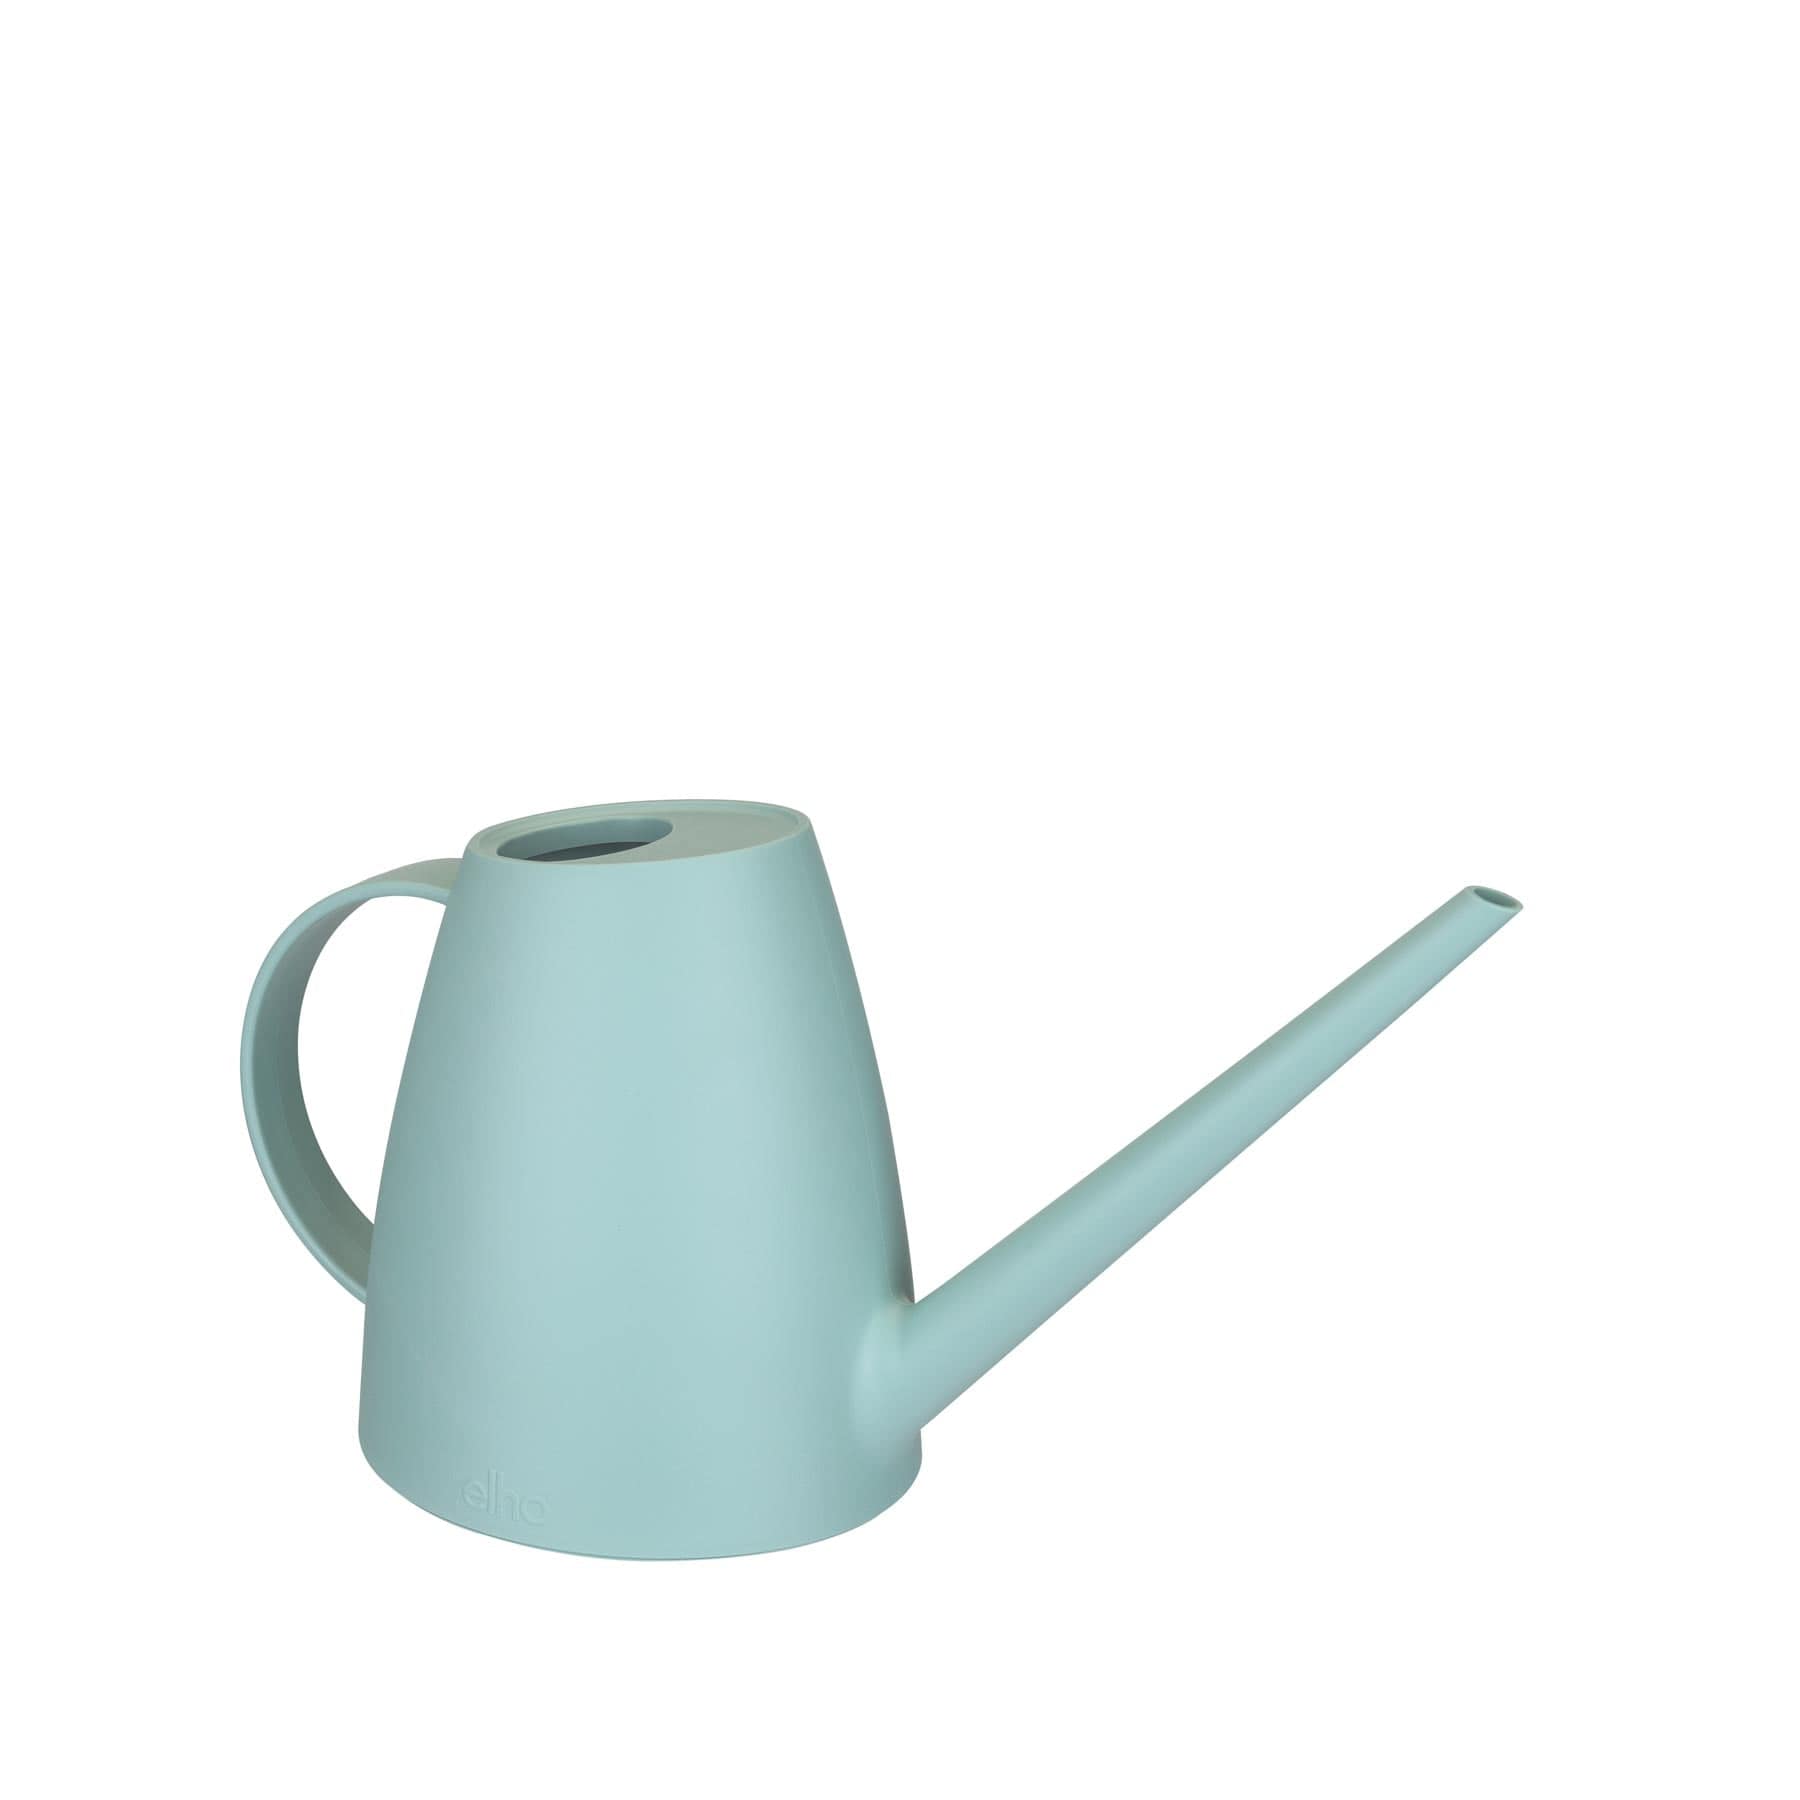 Brussels watering can 1.8l mint